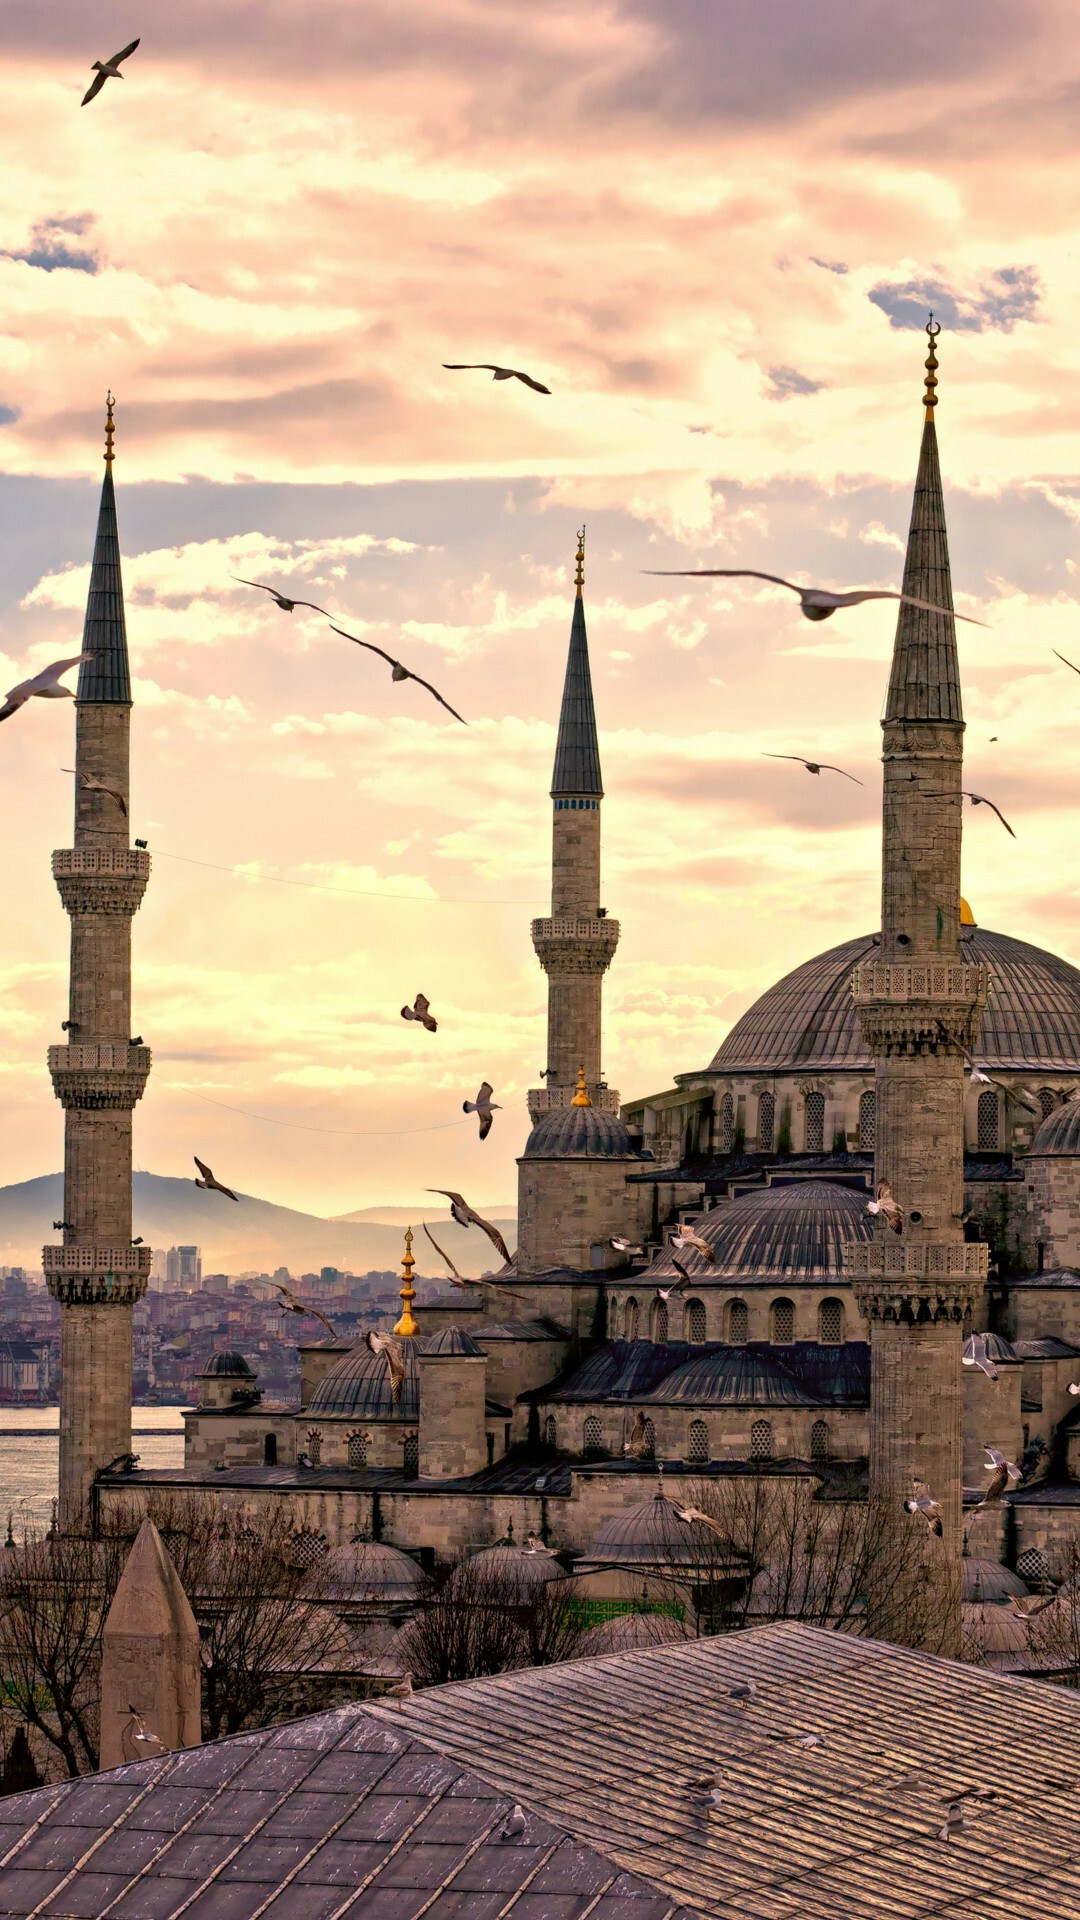 Turkey: Istanbul, Sultan Ahmed Mosque, Cityscape, Architecture, Blue Mosque. 1080x1920 Full HD Wallpaper.